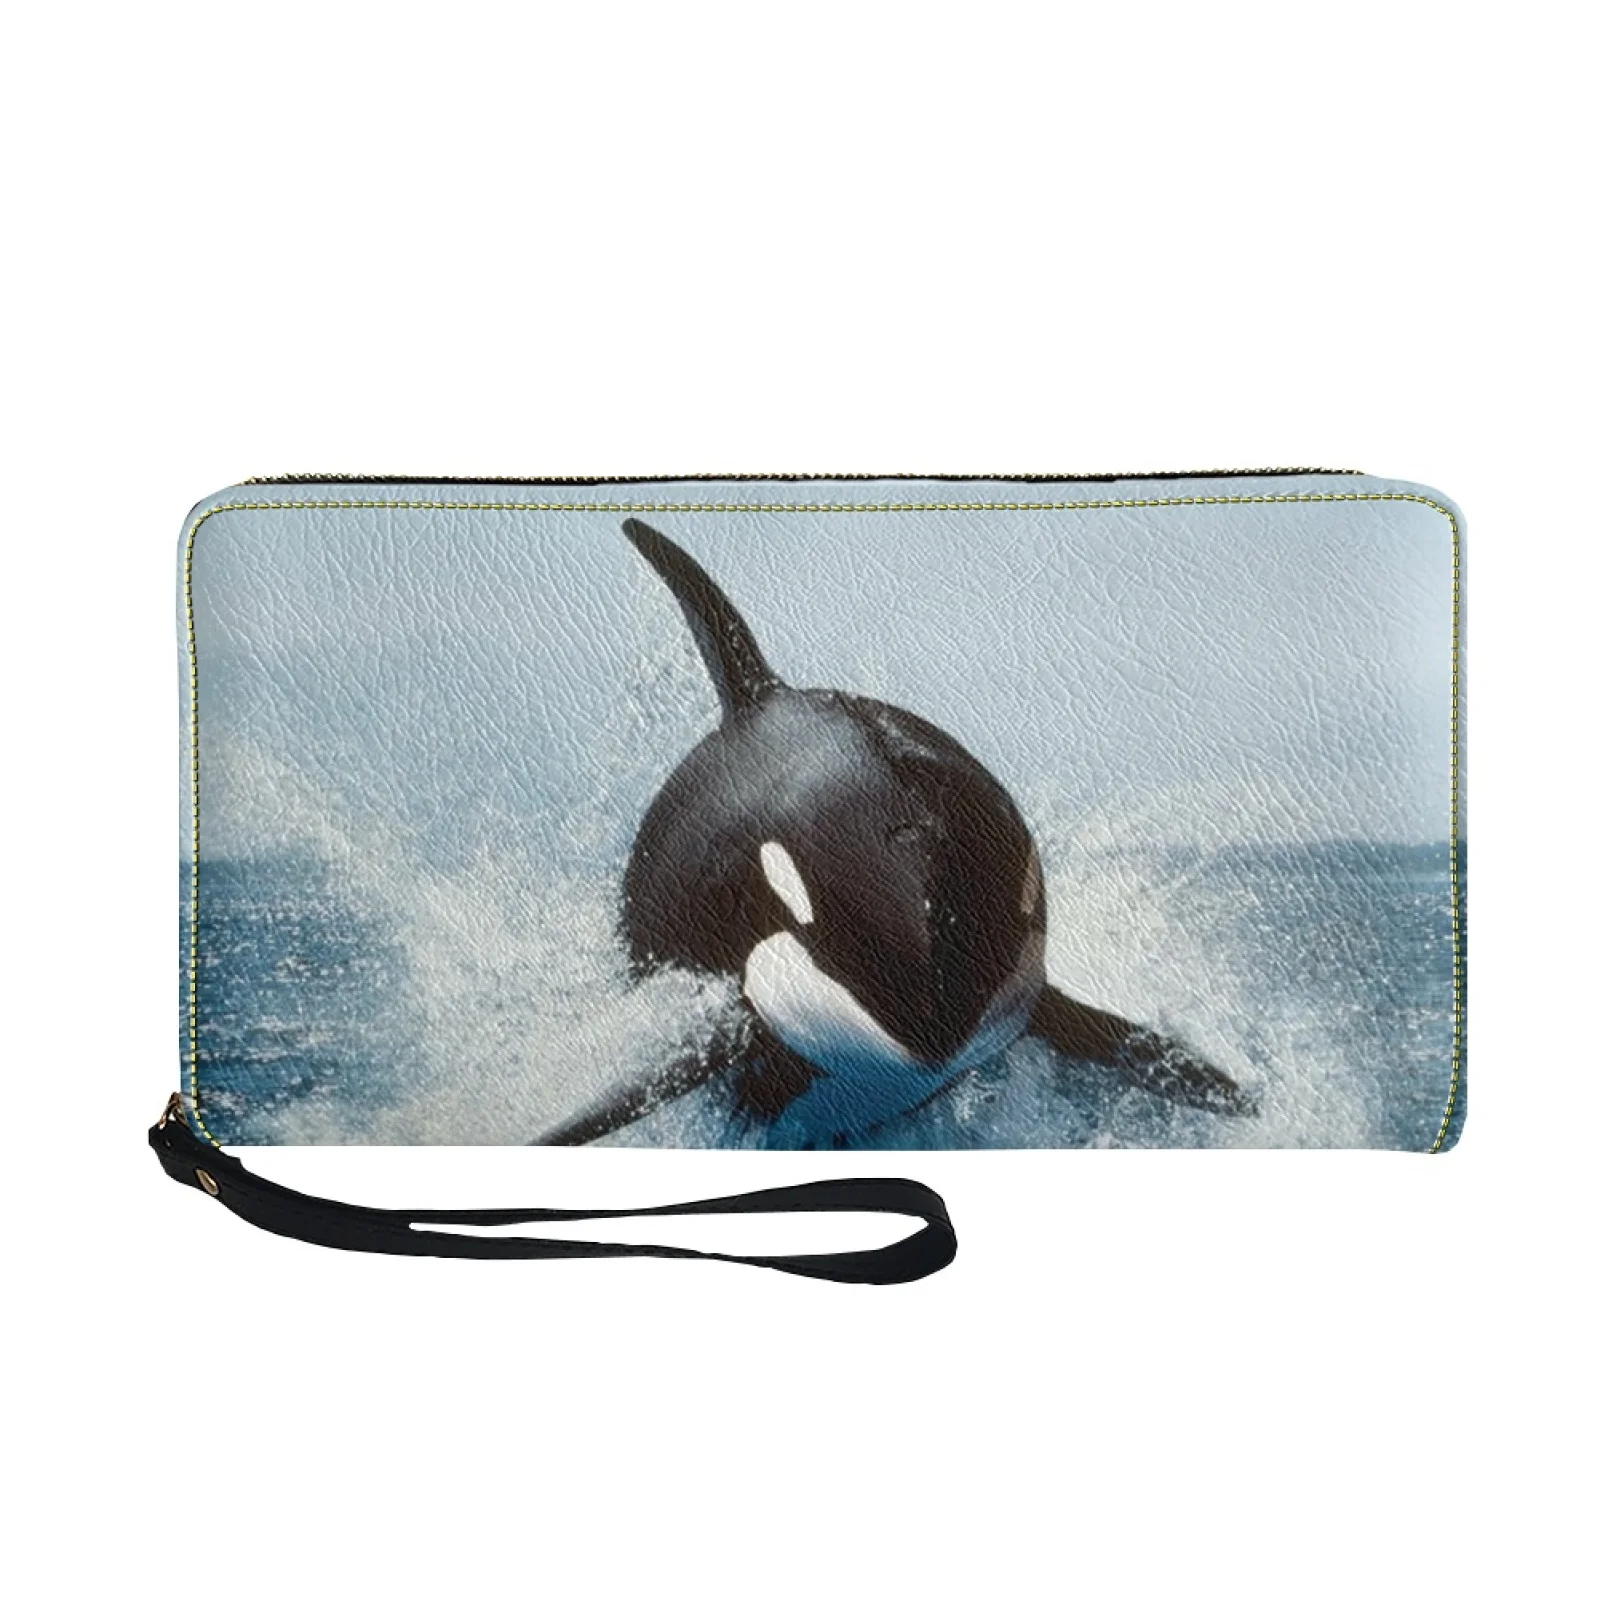 Belidome Women Clutch Zip Around Orca Wallet With Coin Pocket Credit Card Holder Purse Long PU Leather Cash Bags With Wristlet